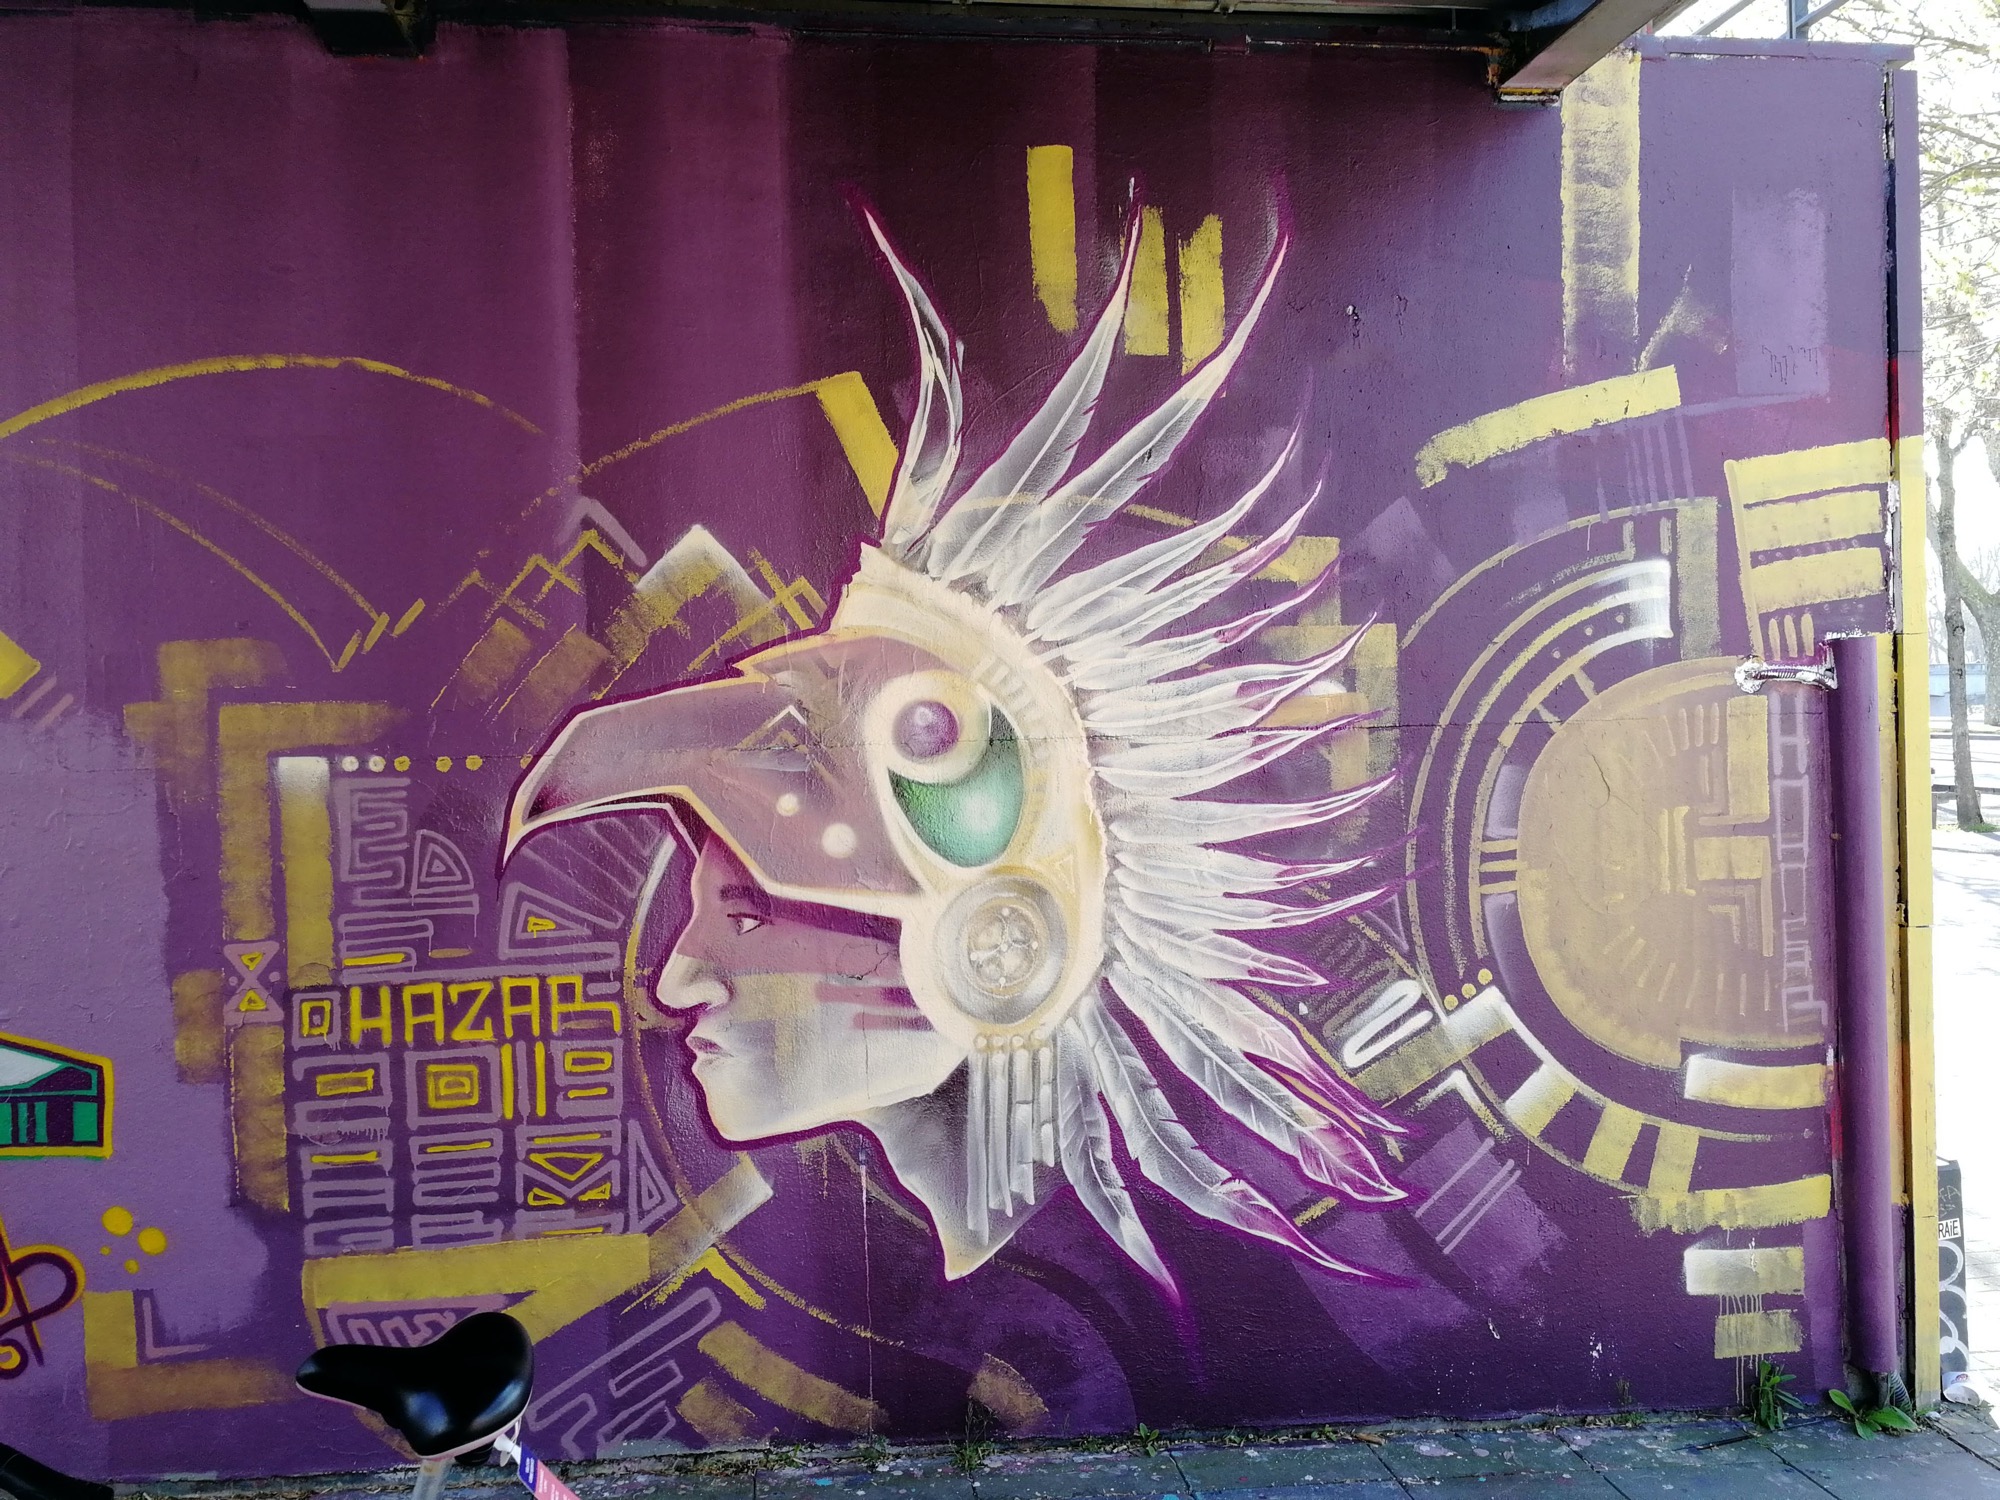 Graffiti 1474  by the artist Hazar captured by Rabot in Angers France